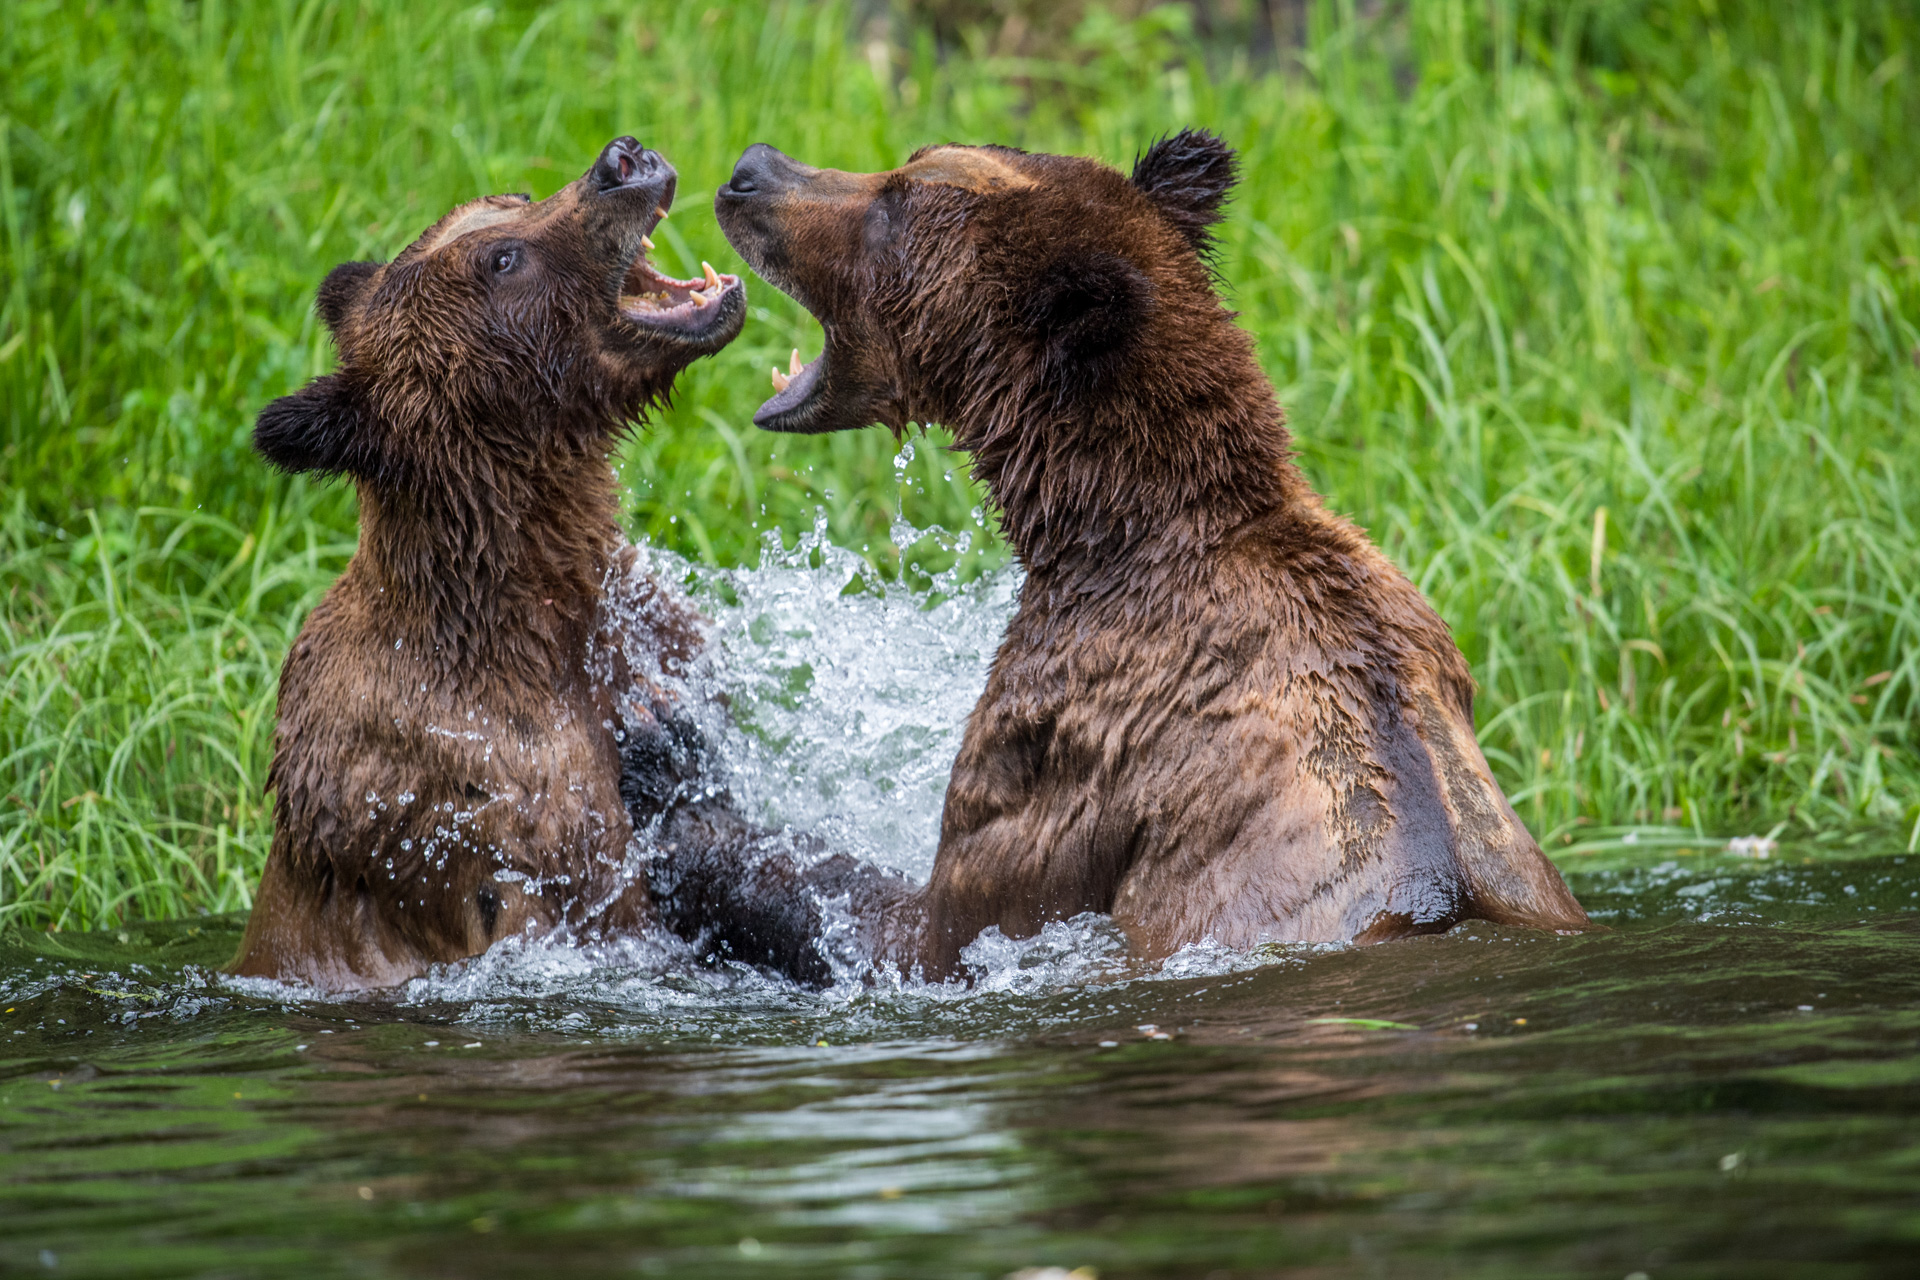 Sub-adult Grizzly Bears, Ursus arctos, playfully wrestle in water in Khutzeymateen Provincial Park, or the Khutzeymateen Grizzly Bear Sanctuary.